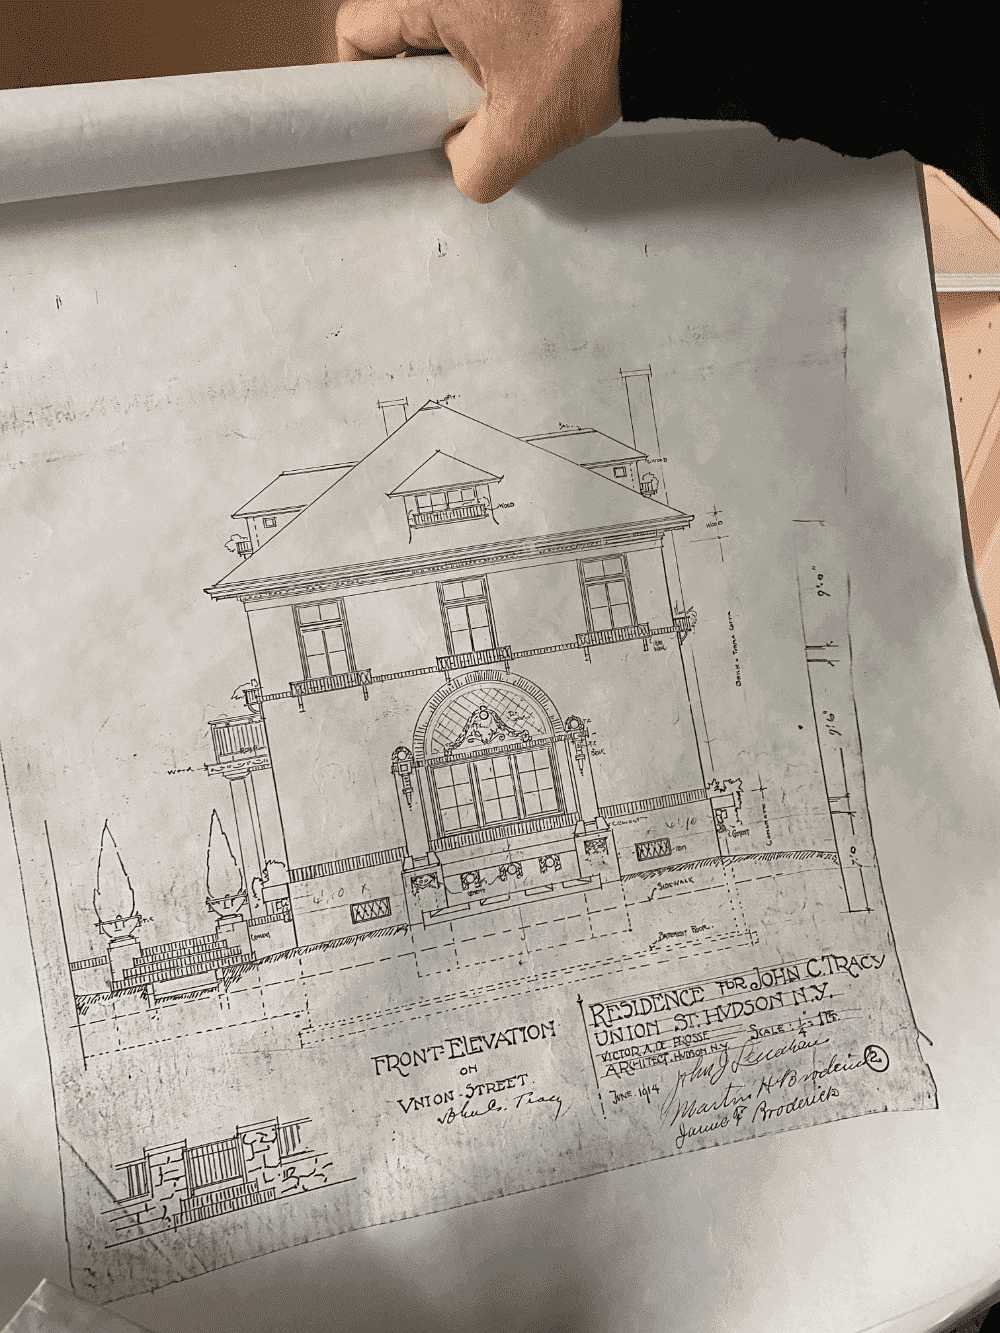 Property Management and Construction Supervision - Image of Architecture drawings